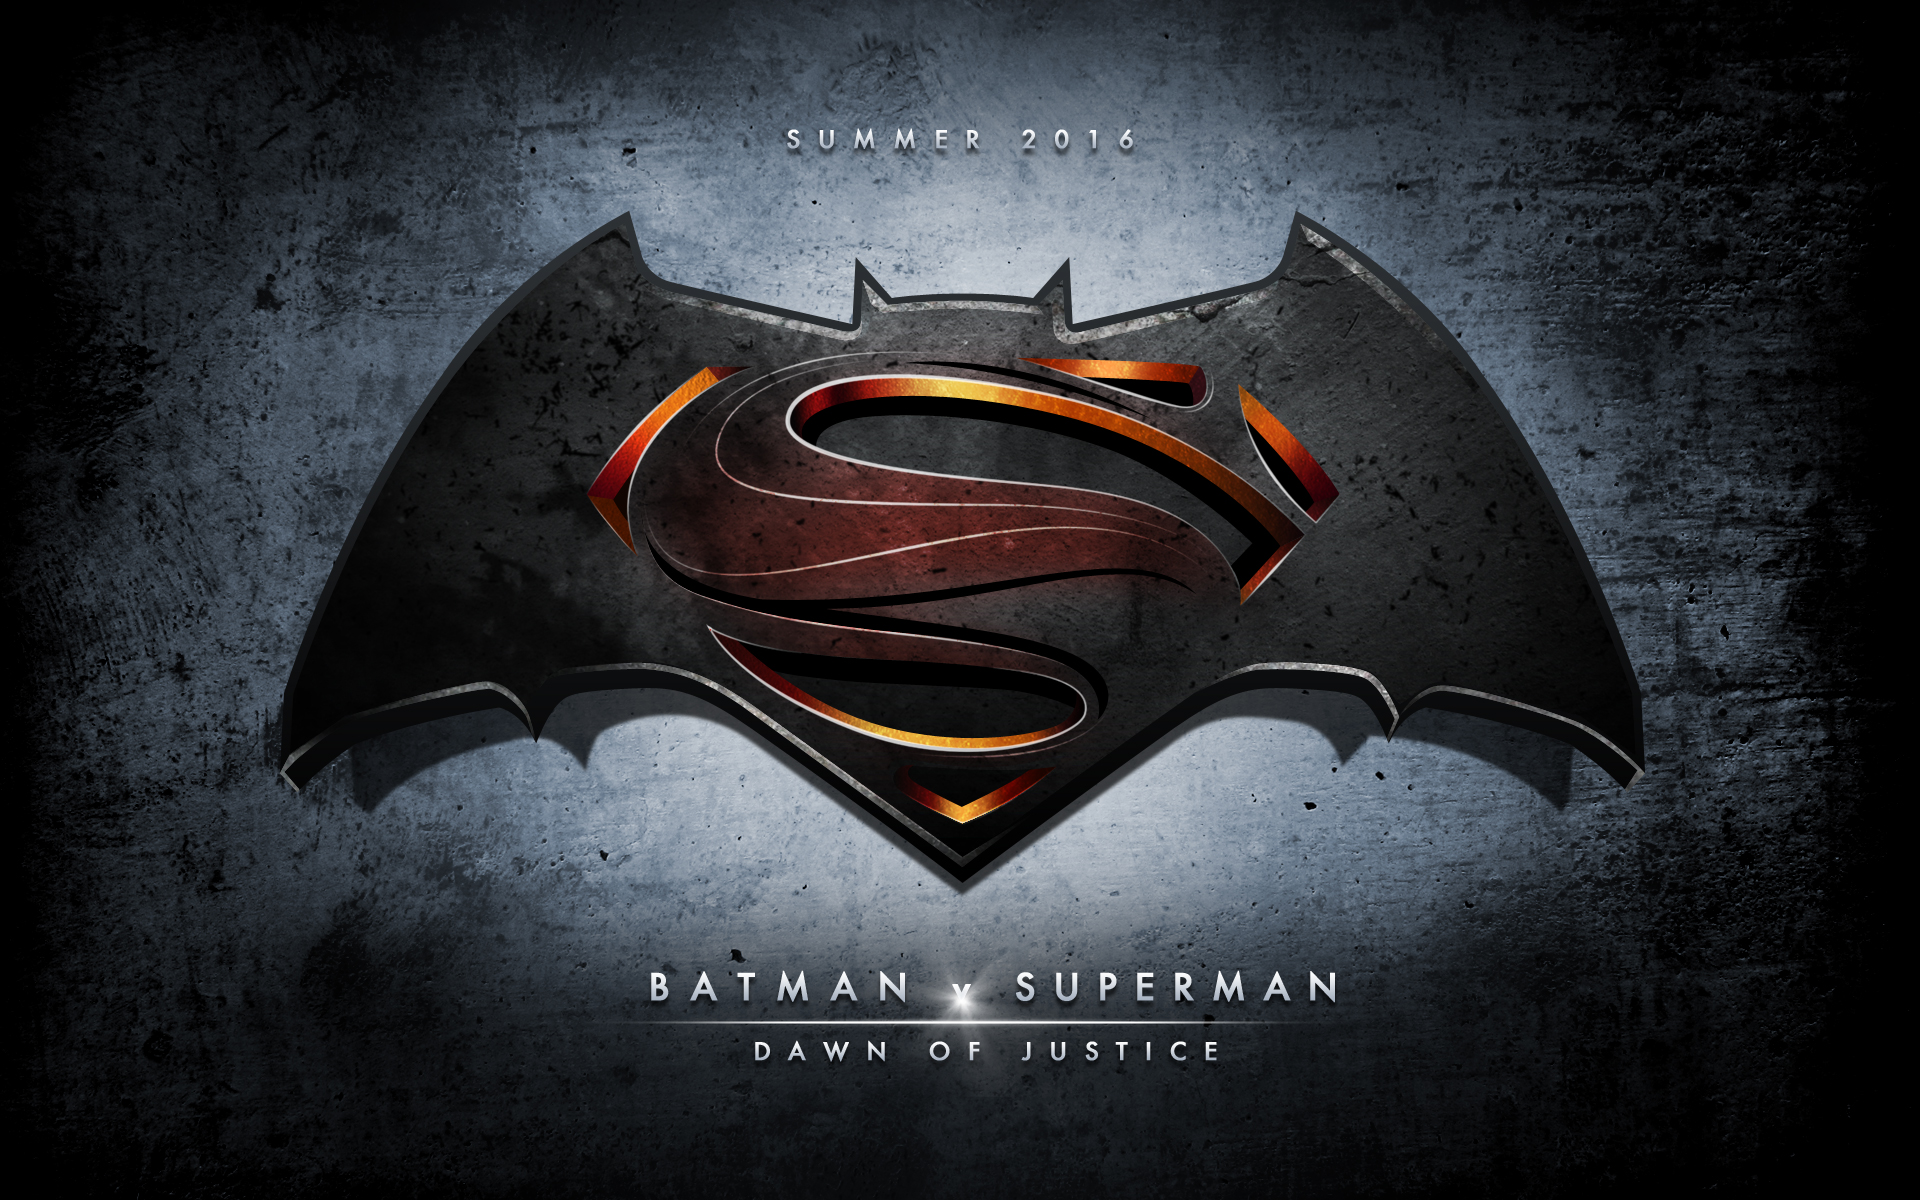 Batman v Superman Dawn of Justice by Spacecowboytv on